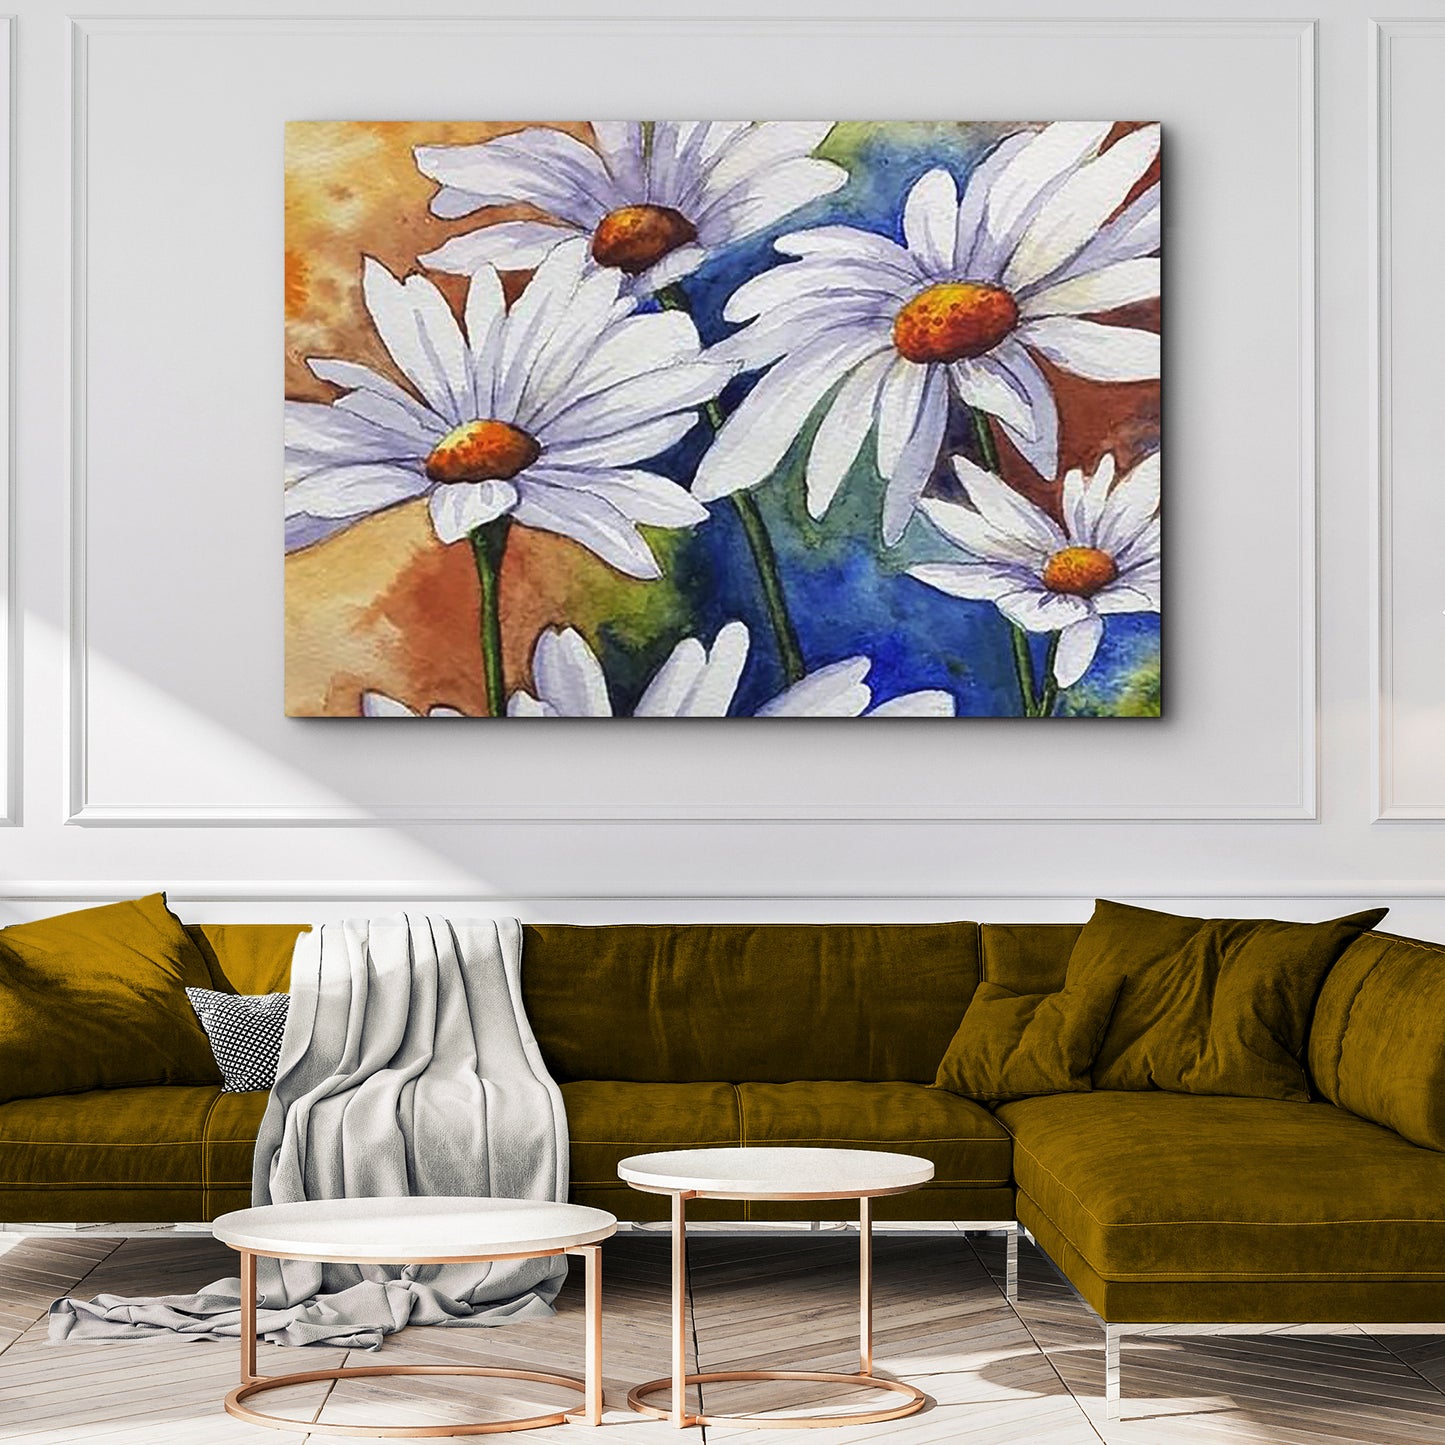 Dancing Daisies Canvas Wall Art Style 2 - Image by Tailored Canvases